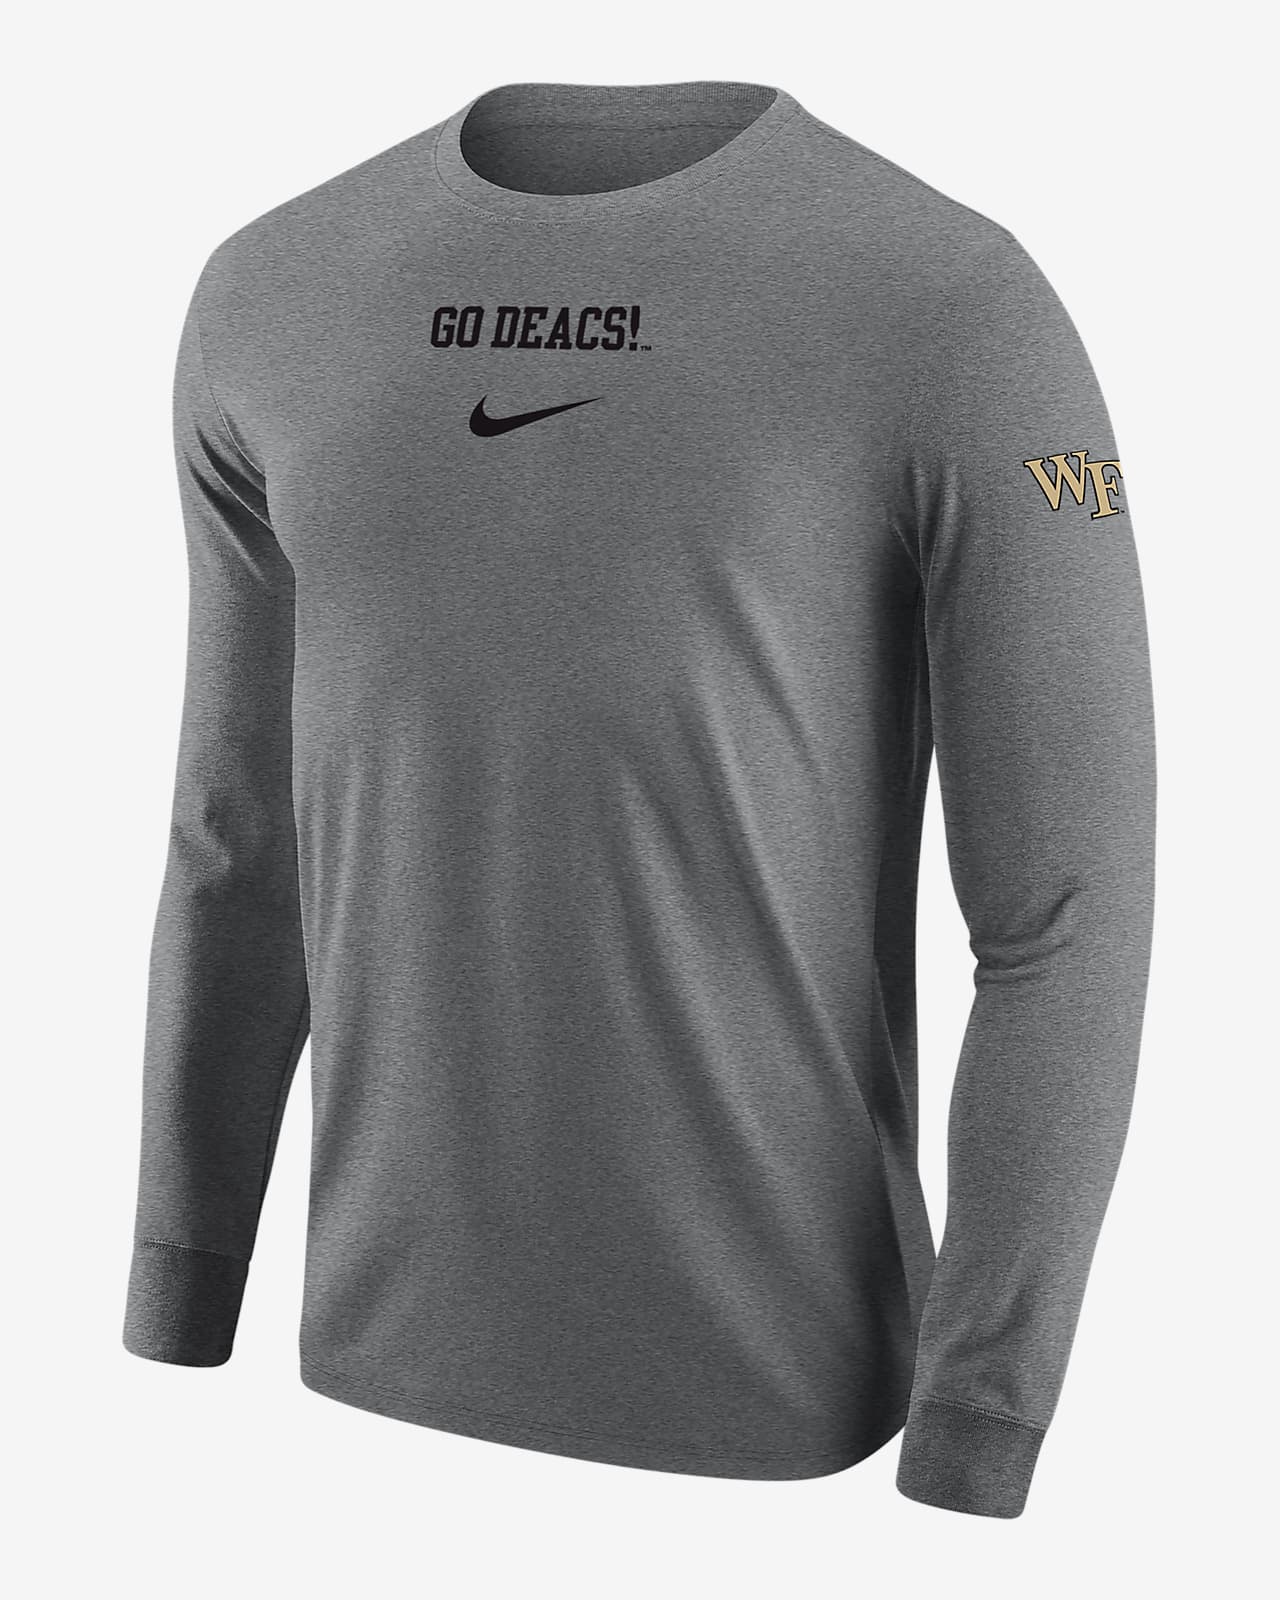 Wake Forest Men's Nike College Long-Sleeve T-Shirt